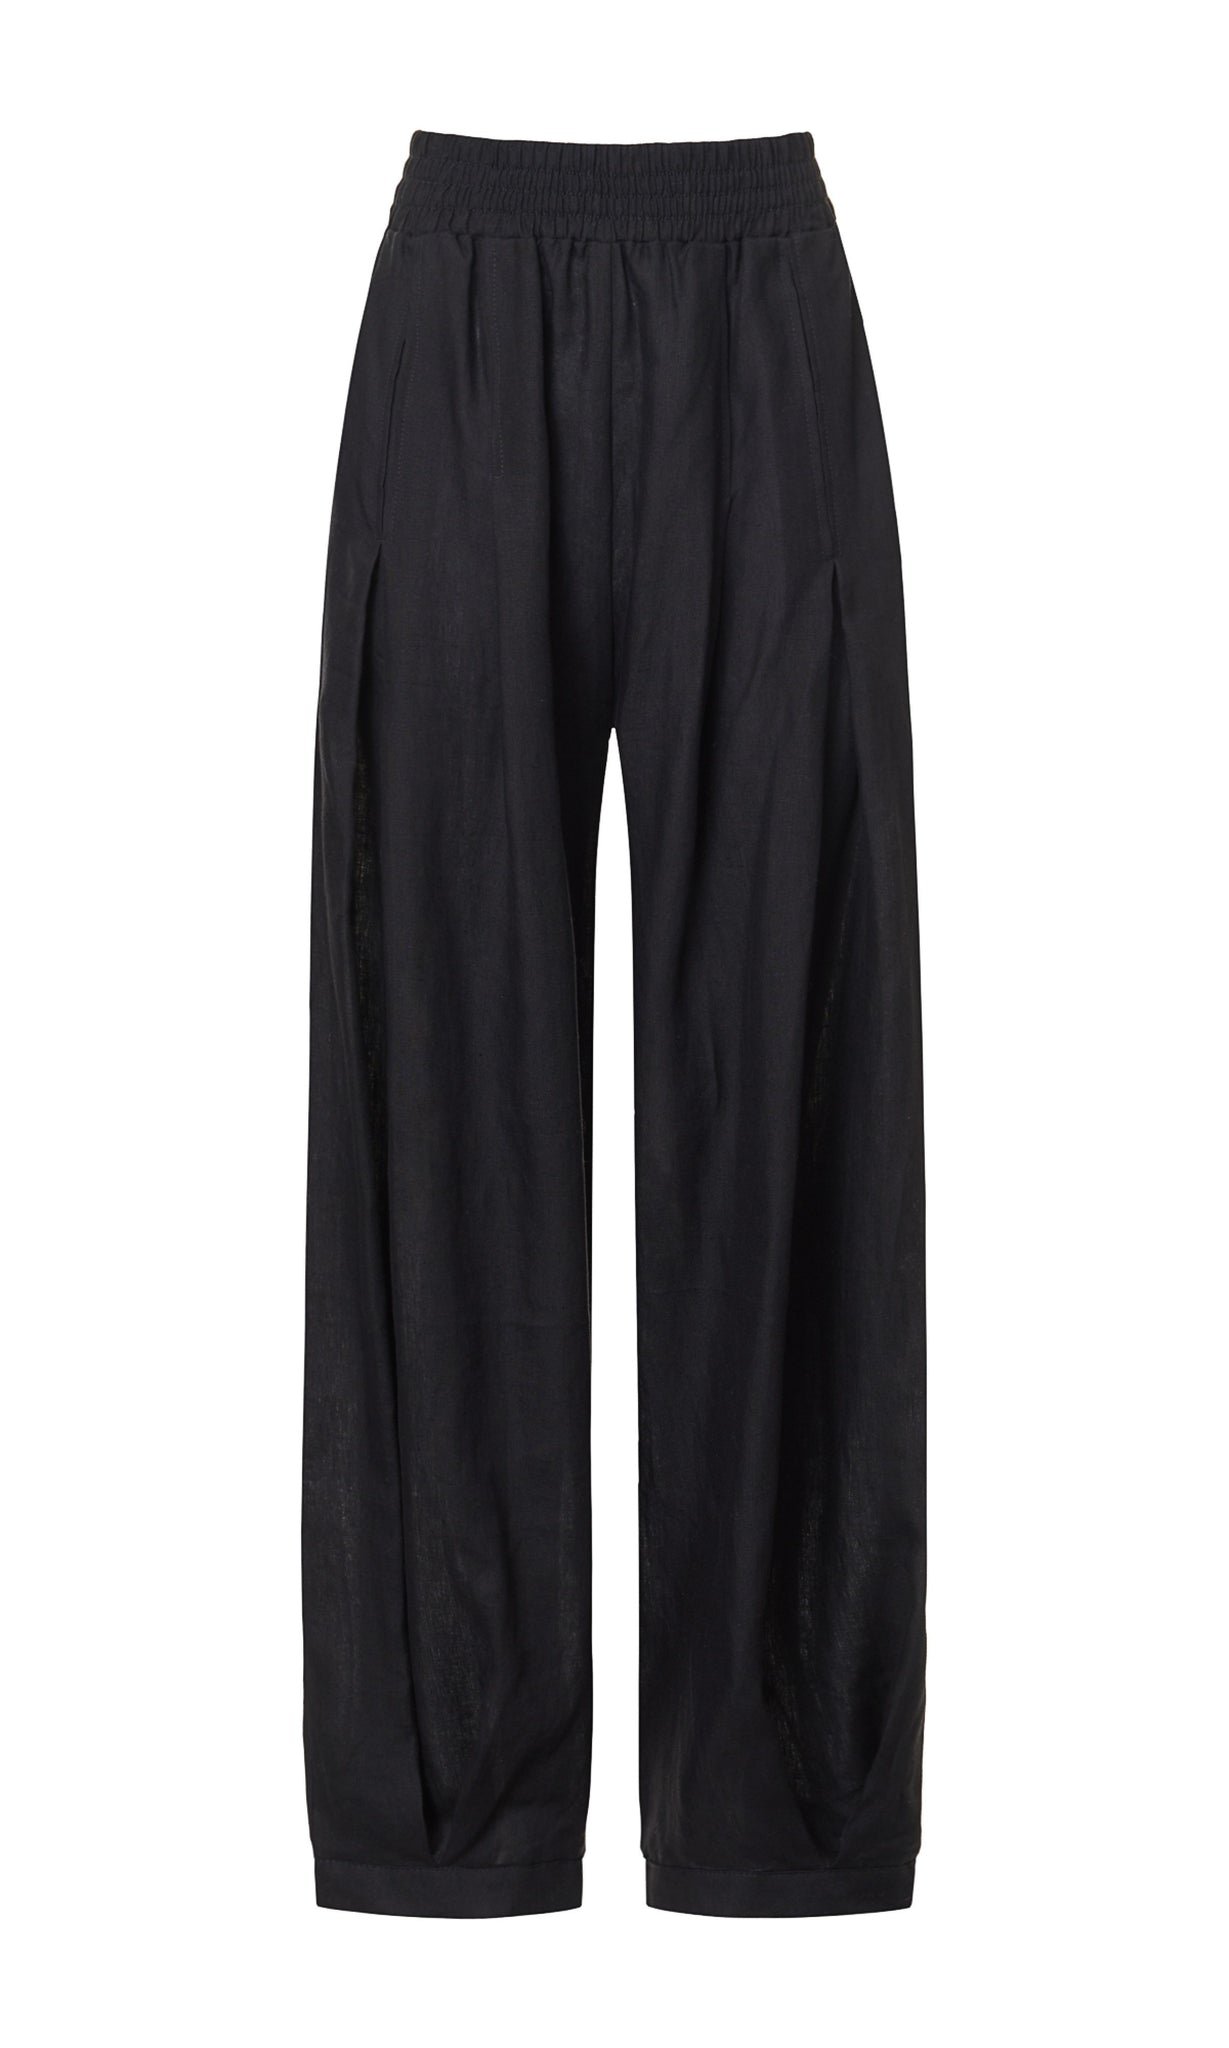 MONTE CARLO - Tuck Pants - weite Leinenhose - EXTRA LANG